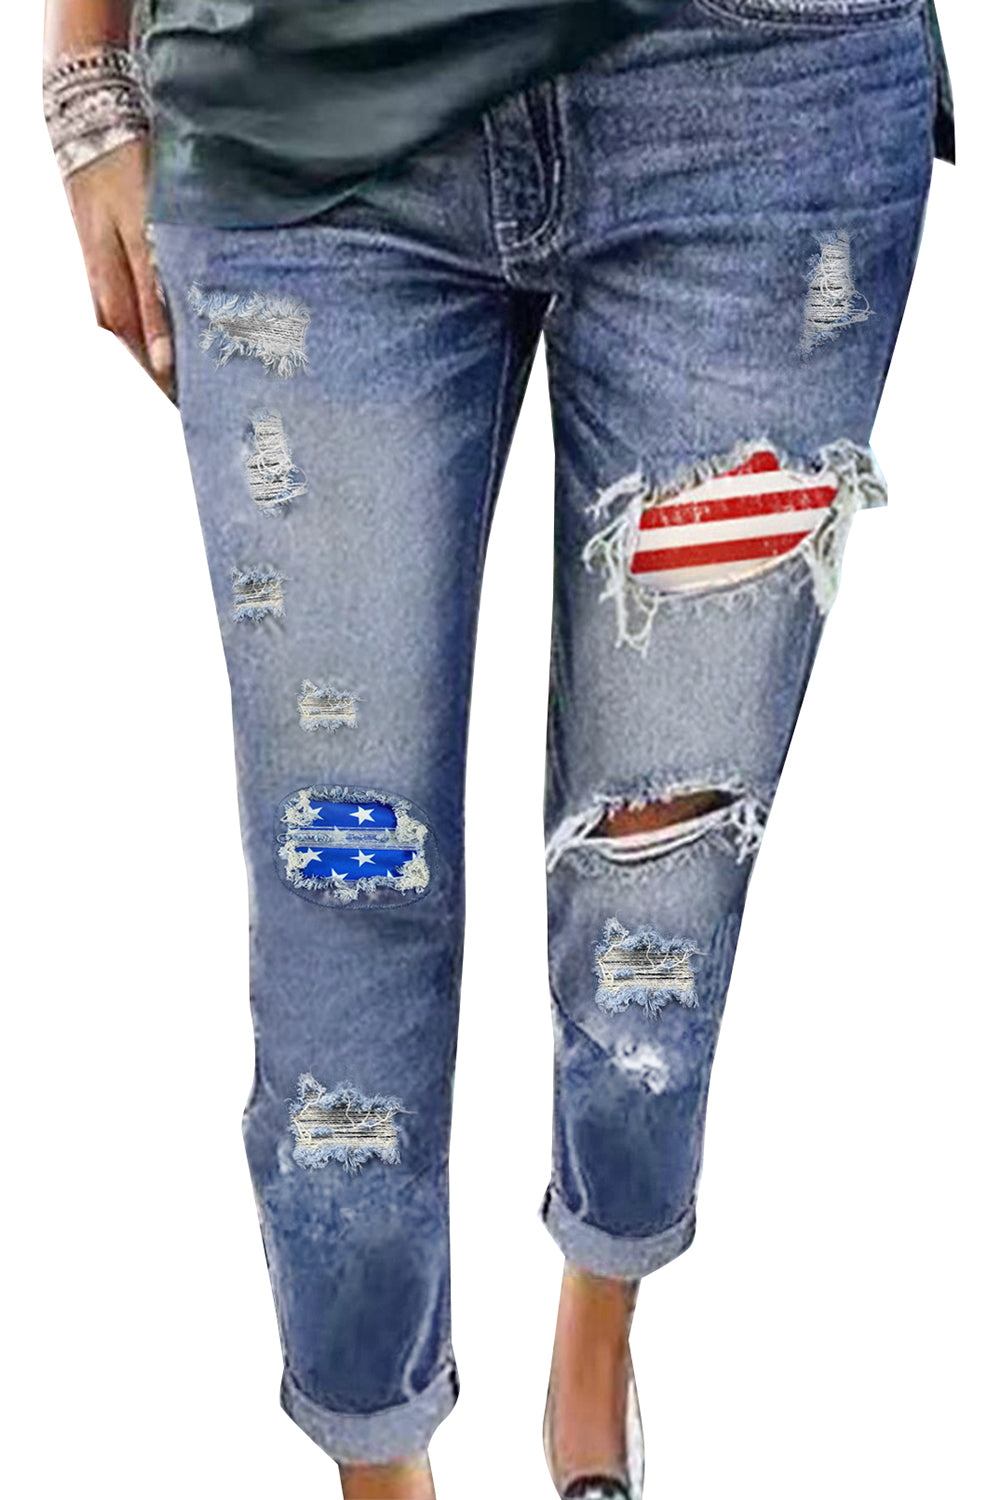 Blue Stripes and Stars Patches Ripped Jeans Boyfriend Denim Pants LC781717-5